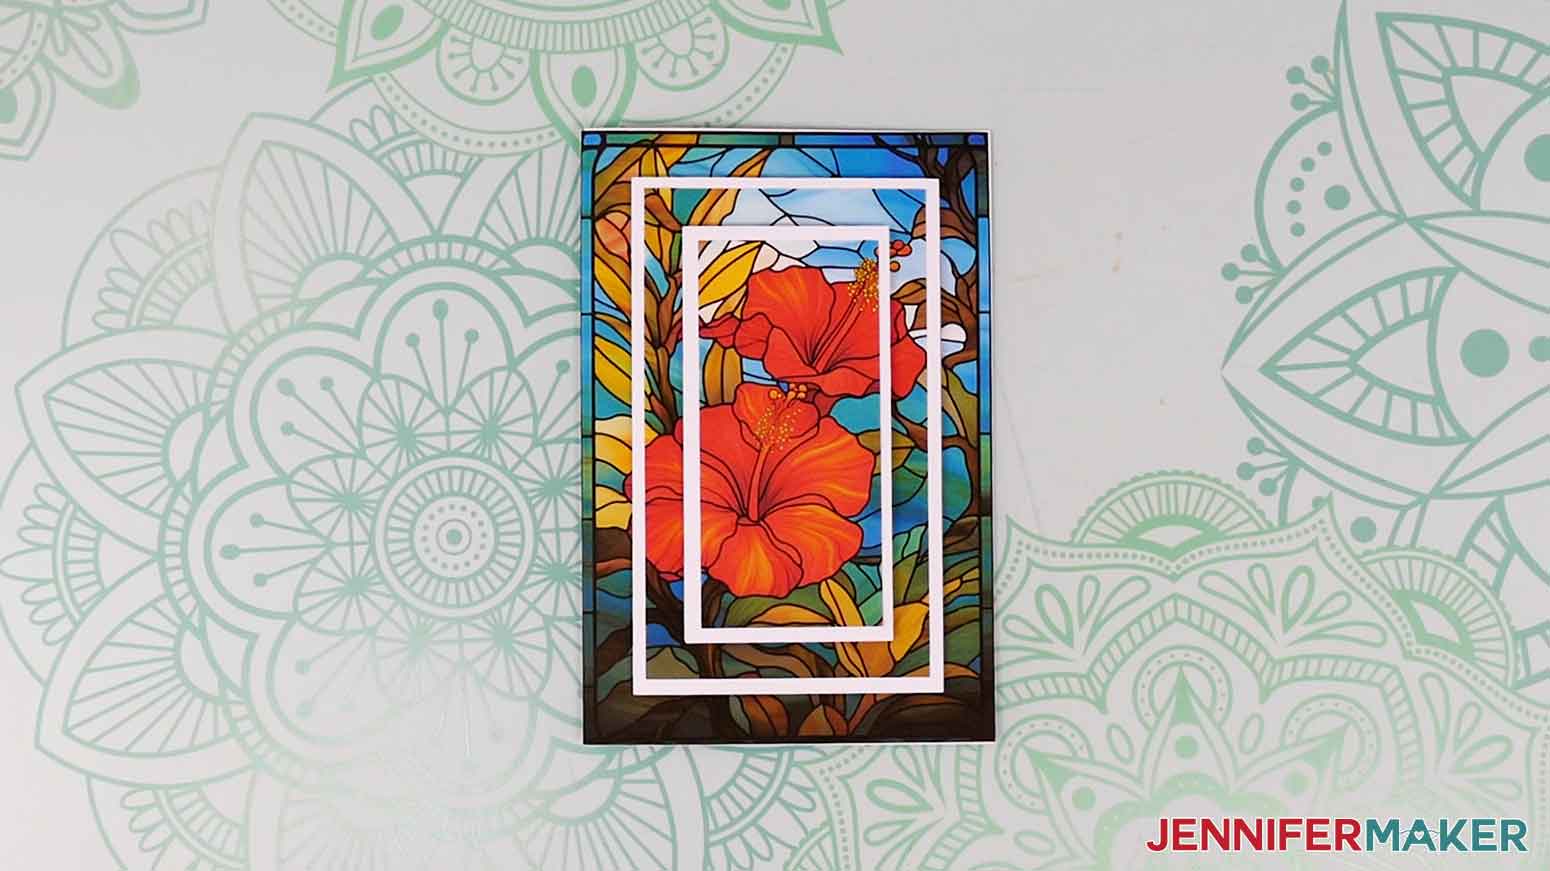 Complete ink-saving stained glass card with tropical flower design.